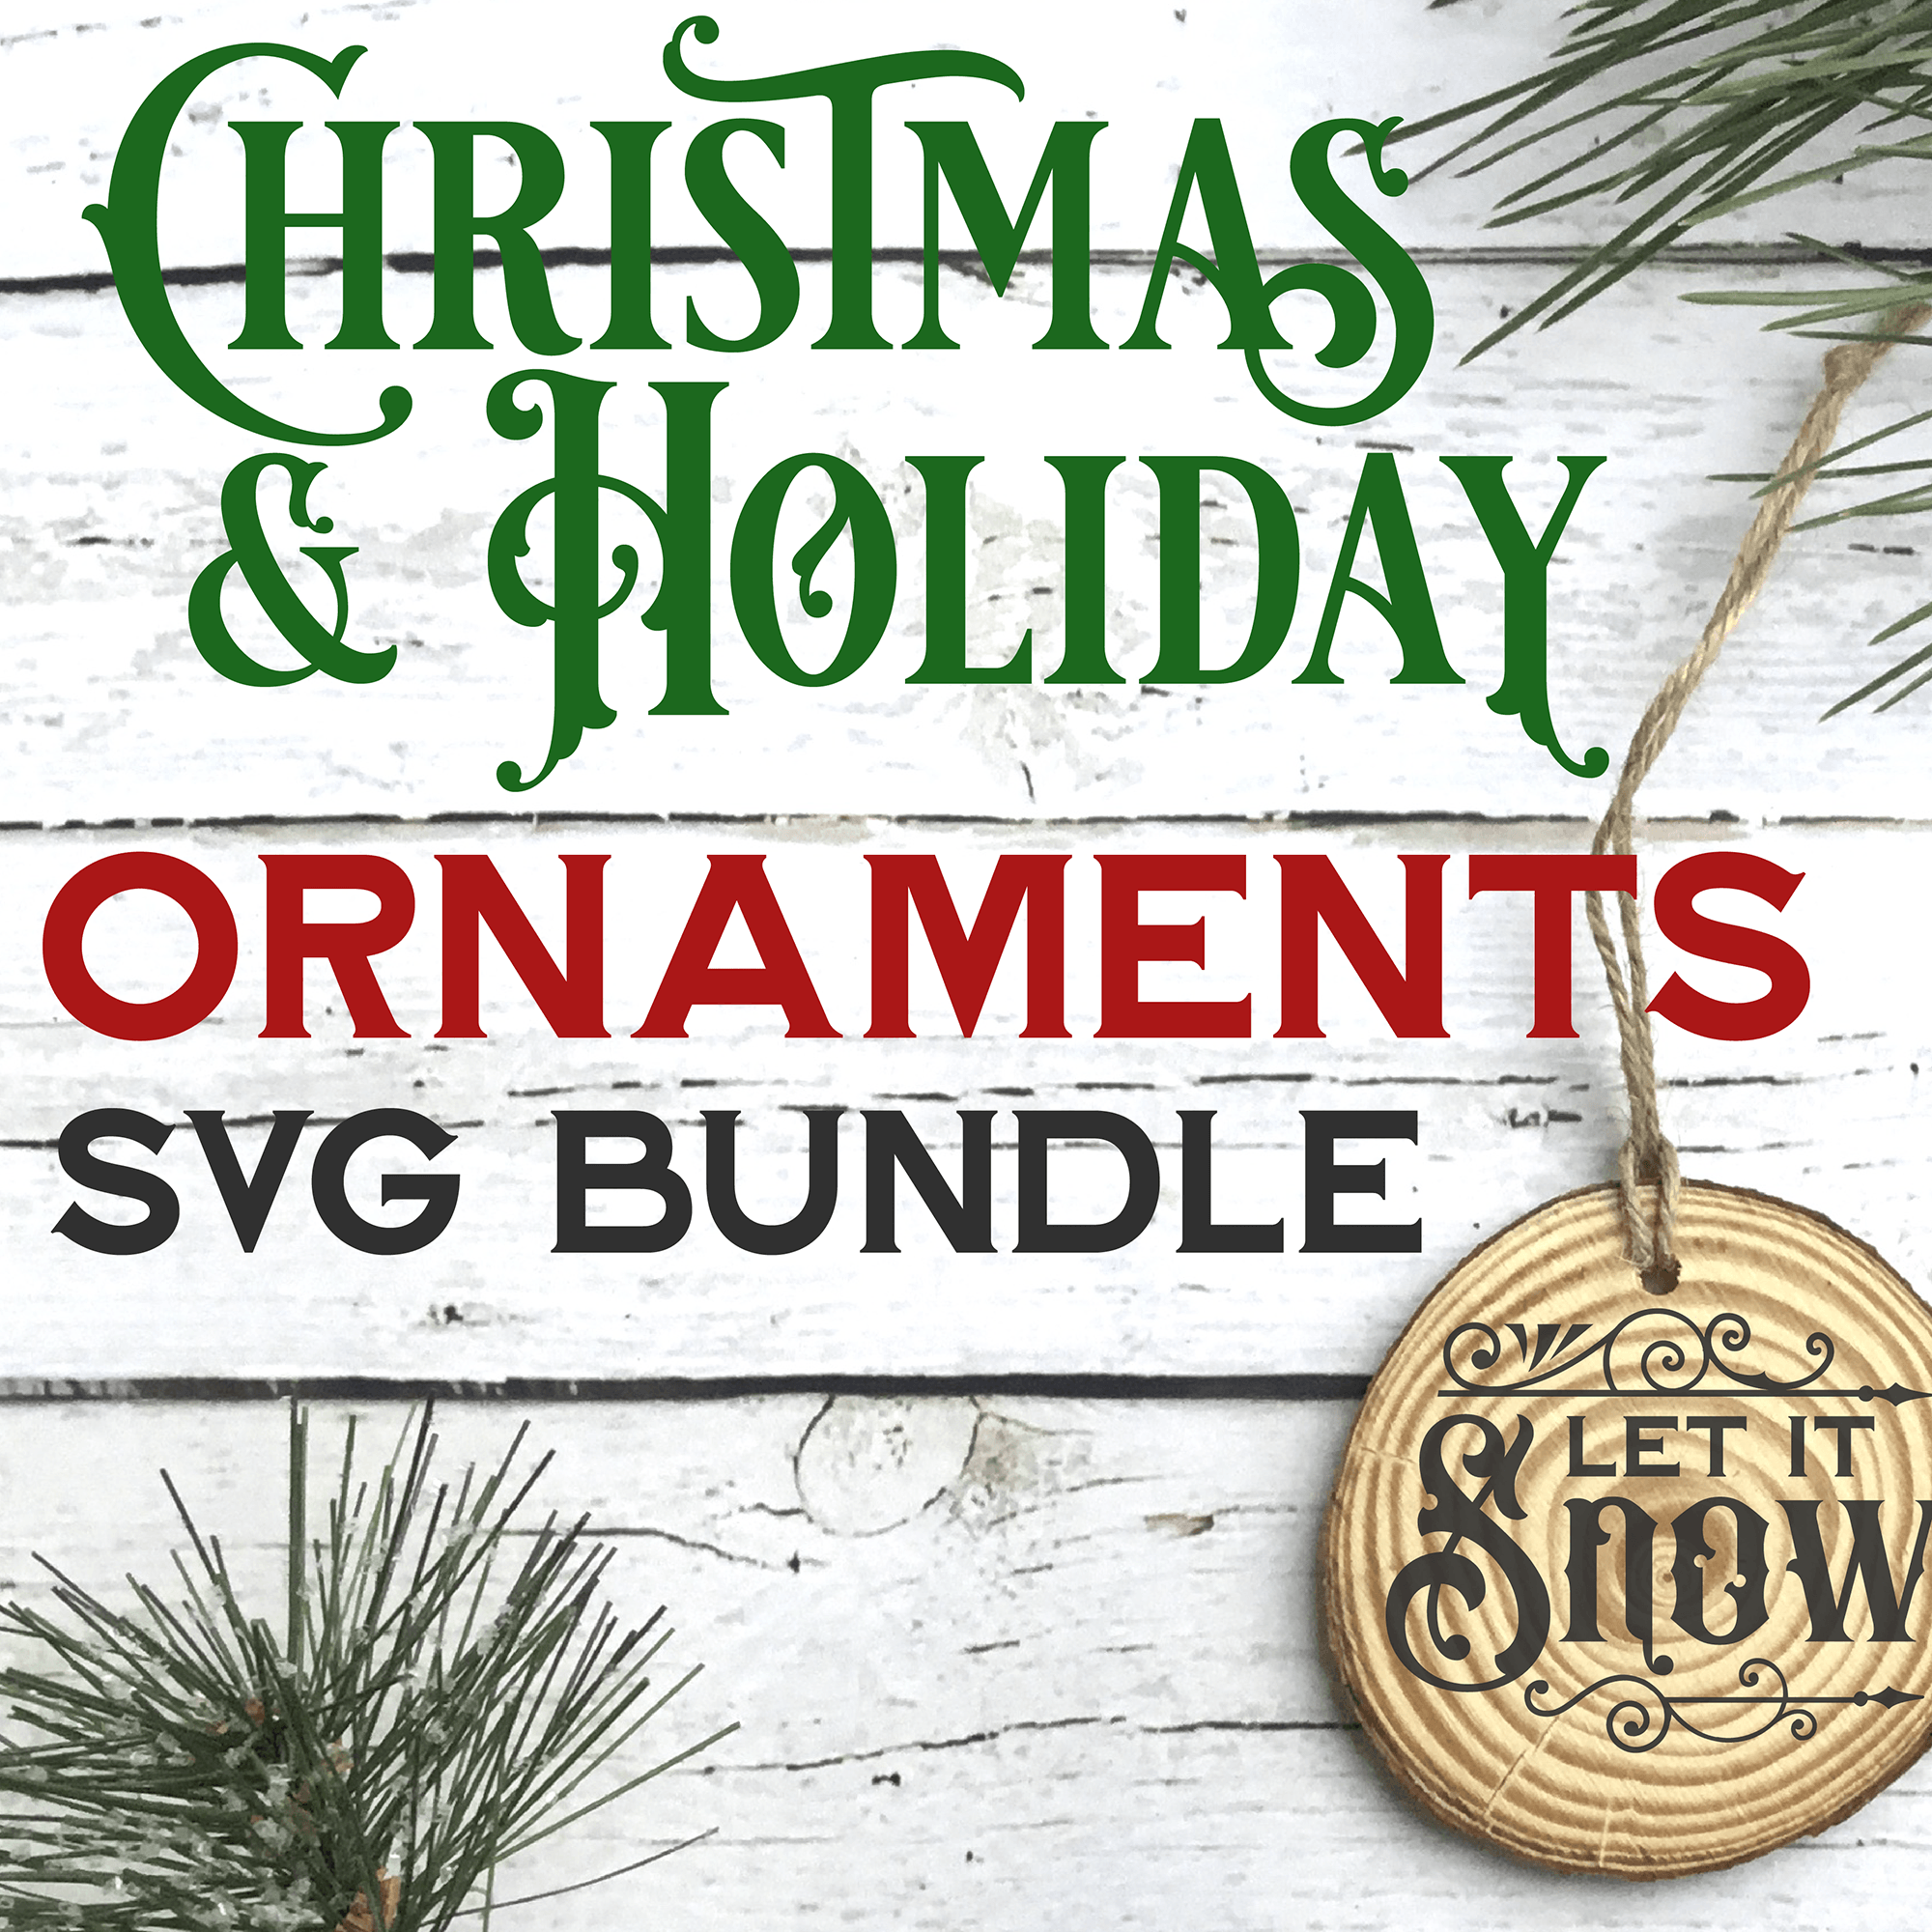 Christmas & Holiday Ornaments SVG Bundle with LIFETIME updates - Commercial Use SVG Files for Cricut & Silhouette